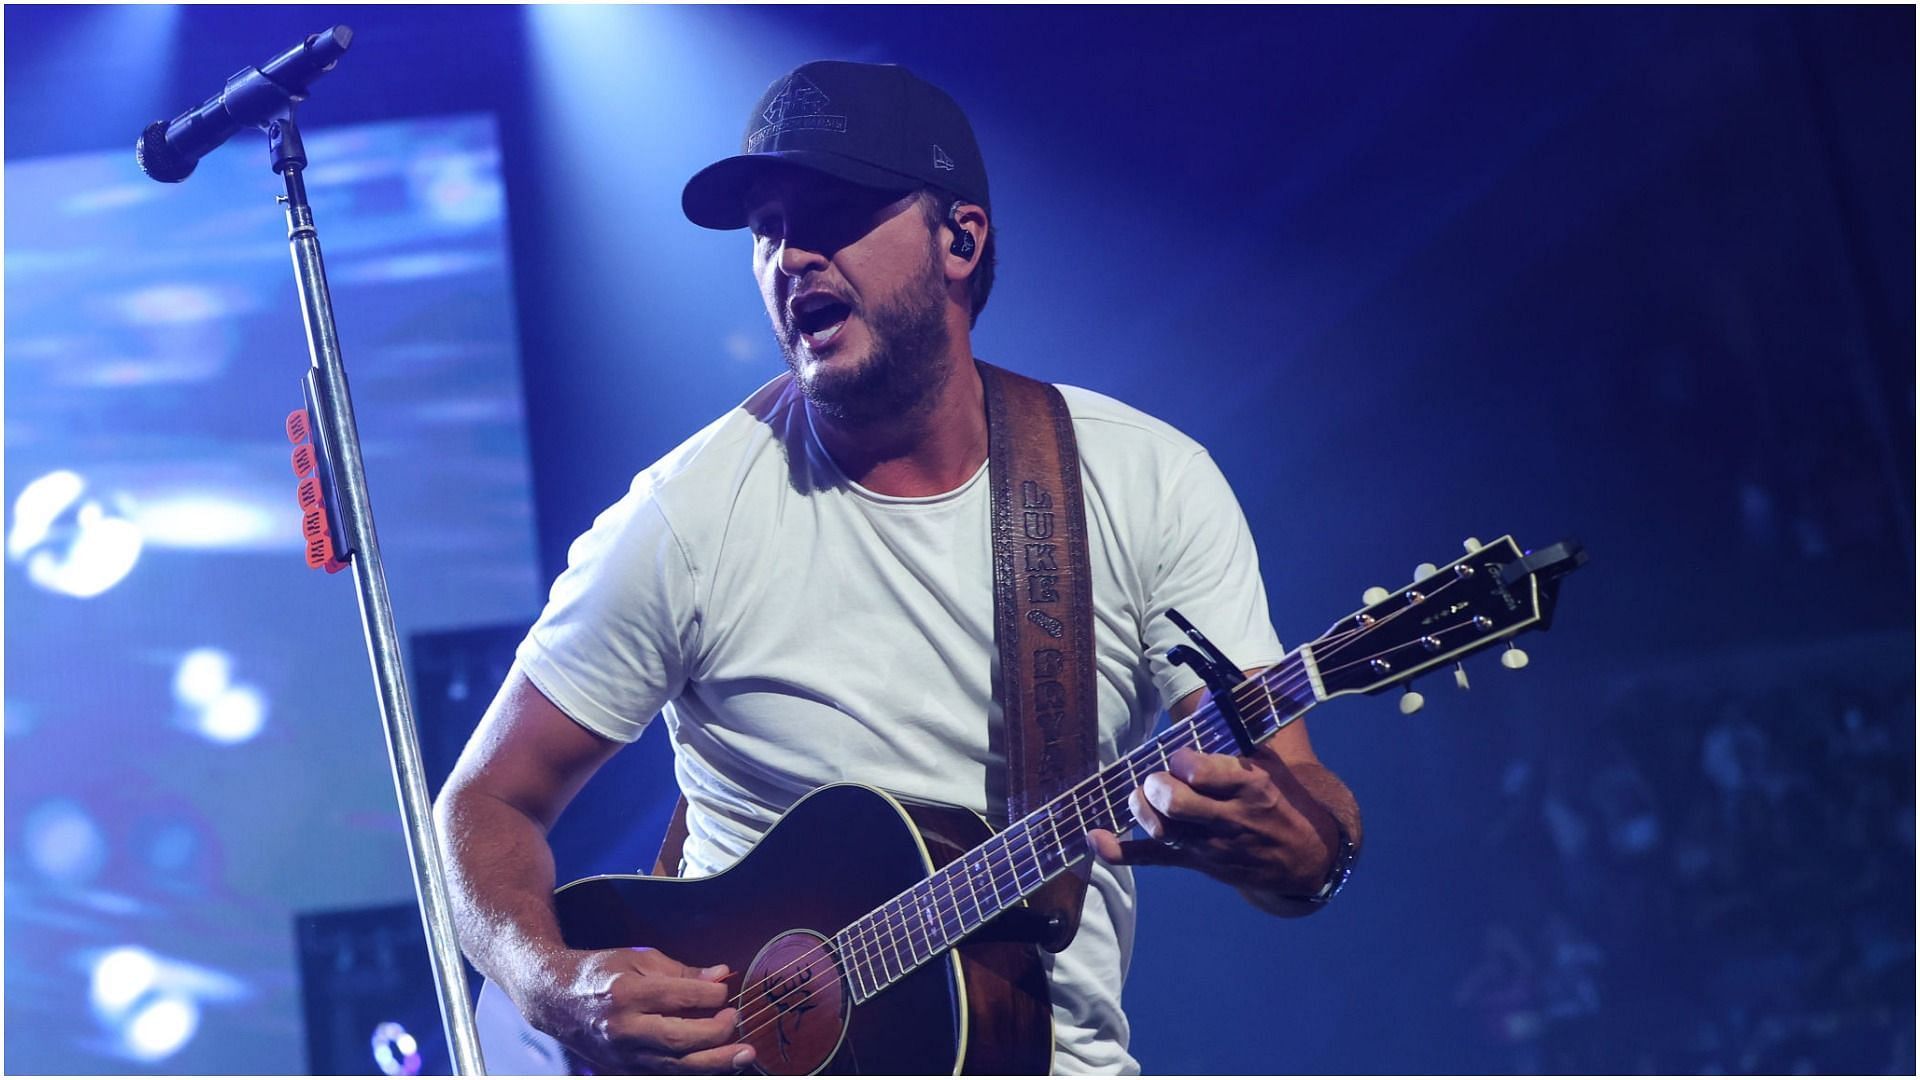 Luke Bryan performs during the Proud To Be Right Here Tour at Bridgestone Arena on July 30, 2021 in Nashville, Tennessee. (Image via Getty Images)